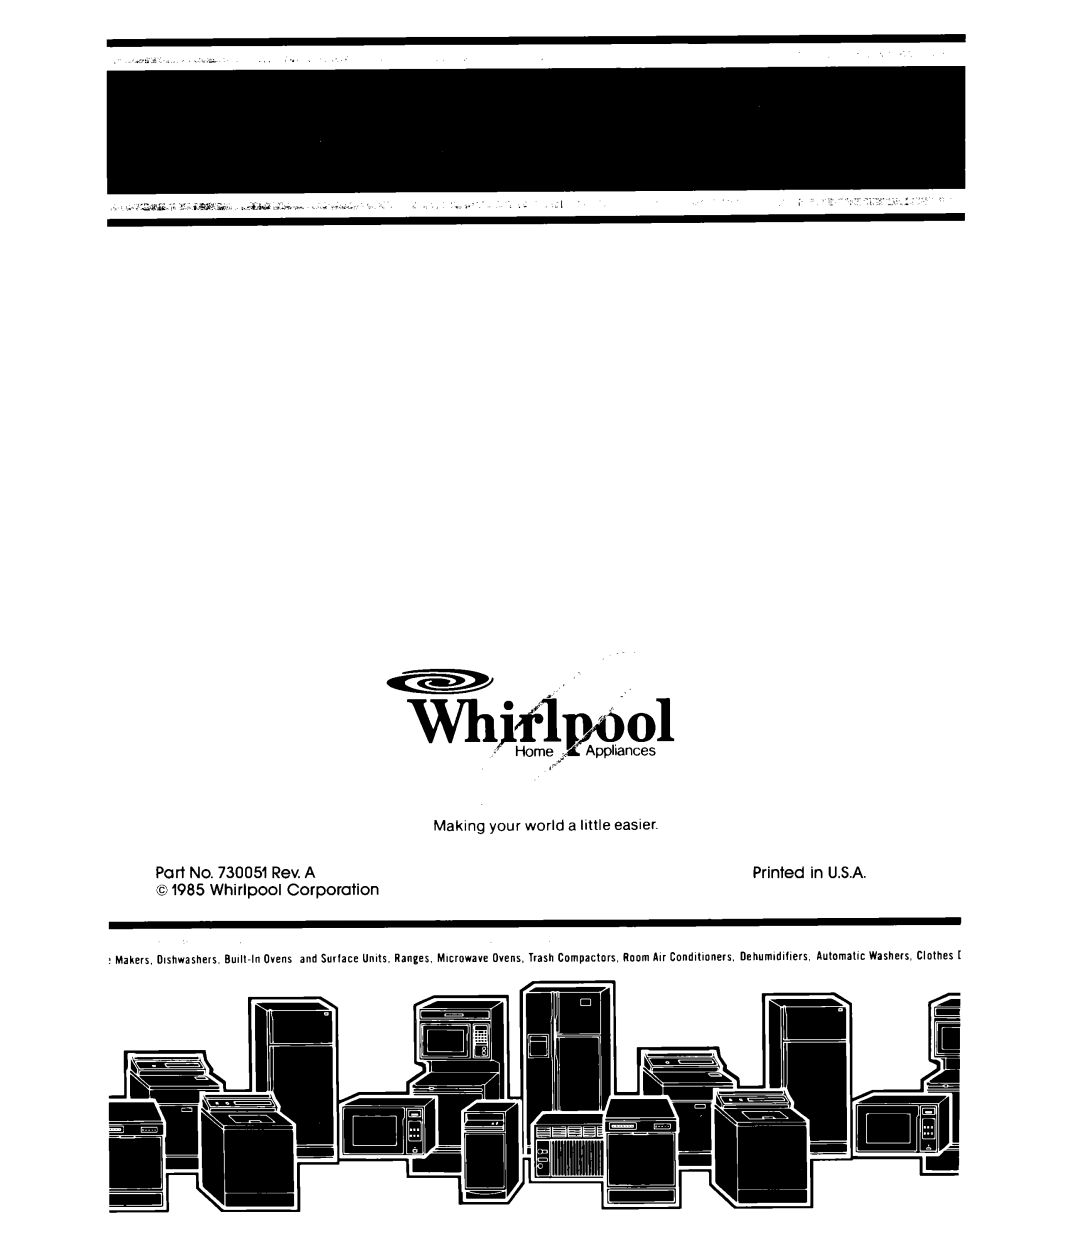 Whirlpool EH230F, EH270F, EH180F, EH150F manual Rev. A, Corporation, 0 1985 Whirlpool, Making your world, a little easier 